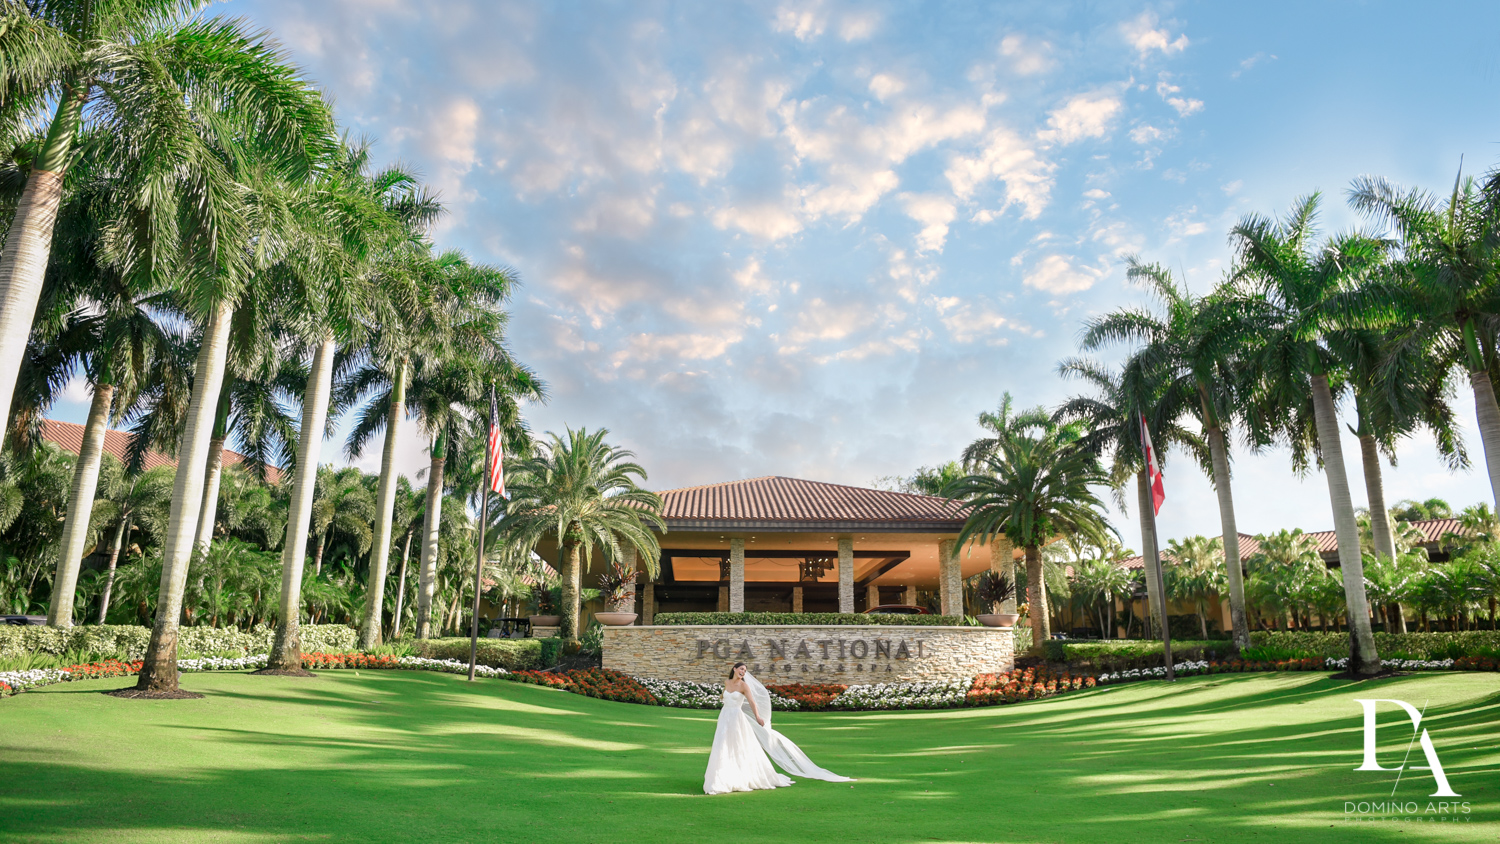 Stunning Golf Course Wedding at PGA National Palm Beach by Domino Arts Photography